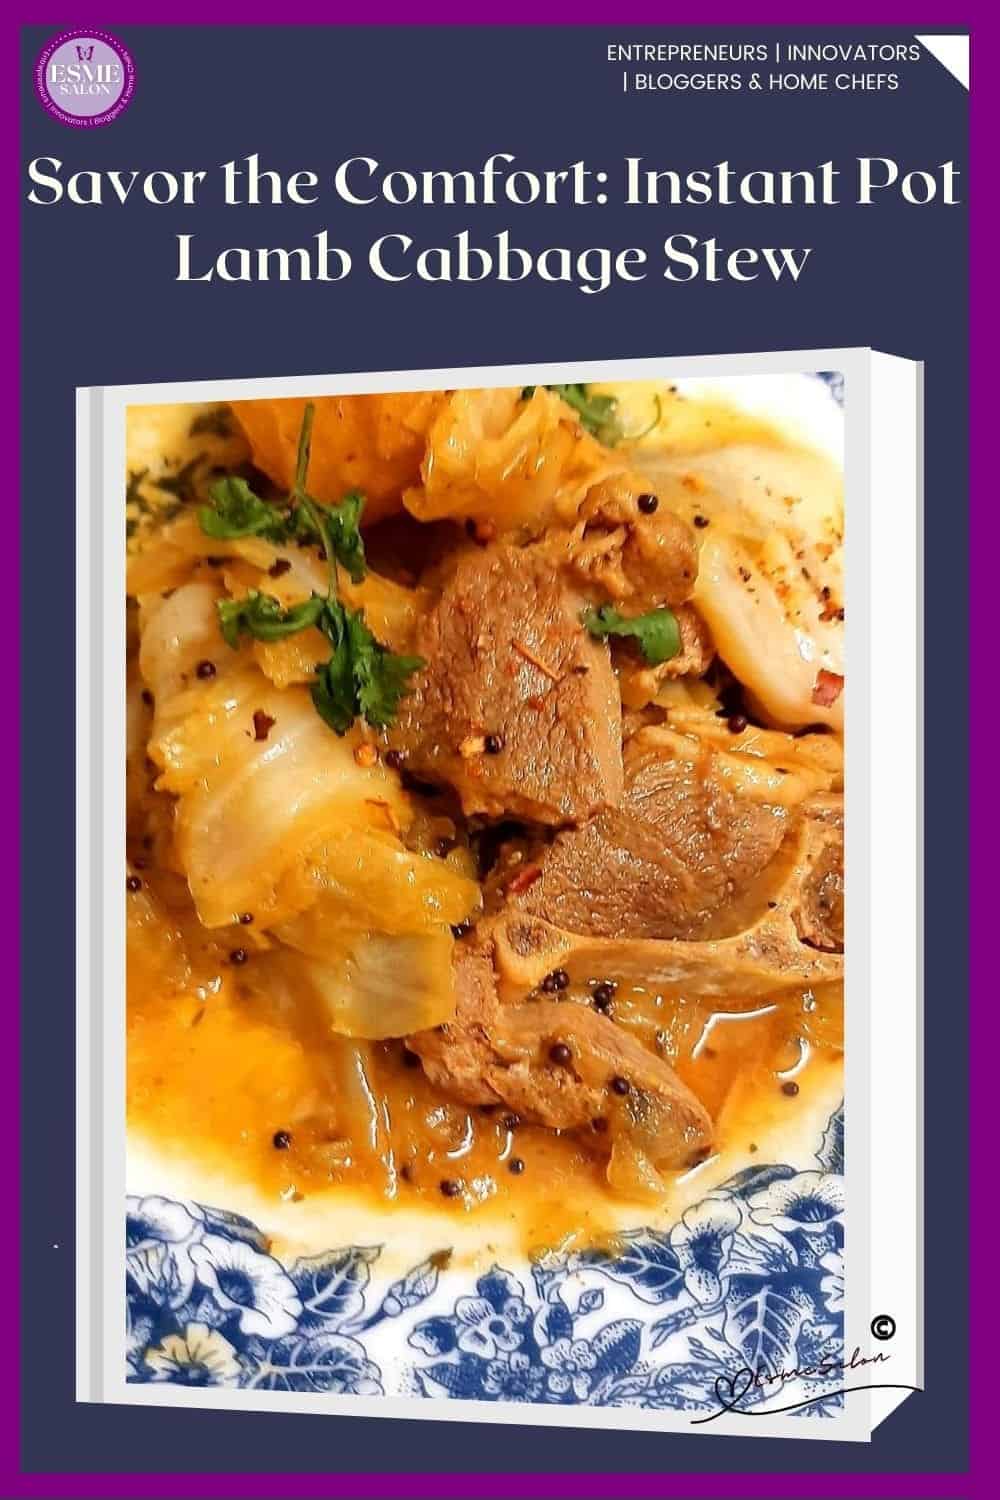 an image of a bowl of Lamb Cabbage Stew prepared in an Instant